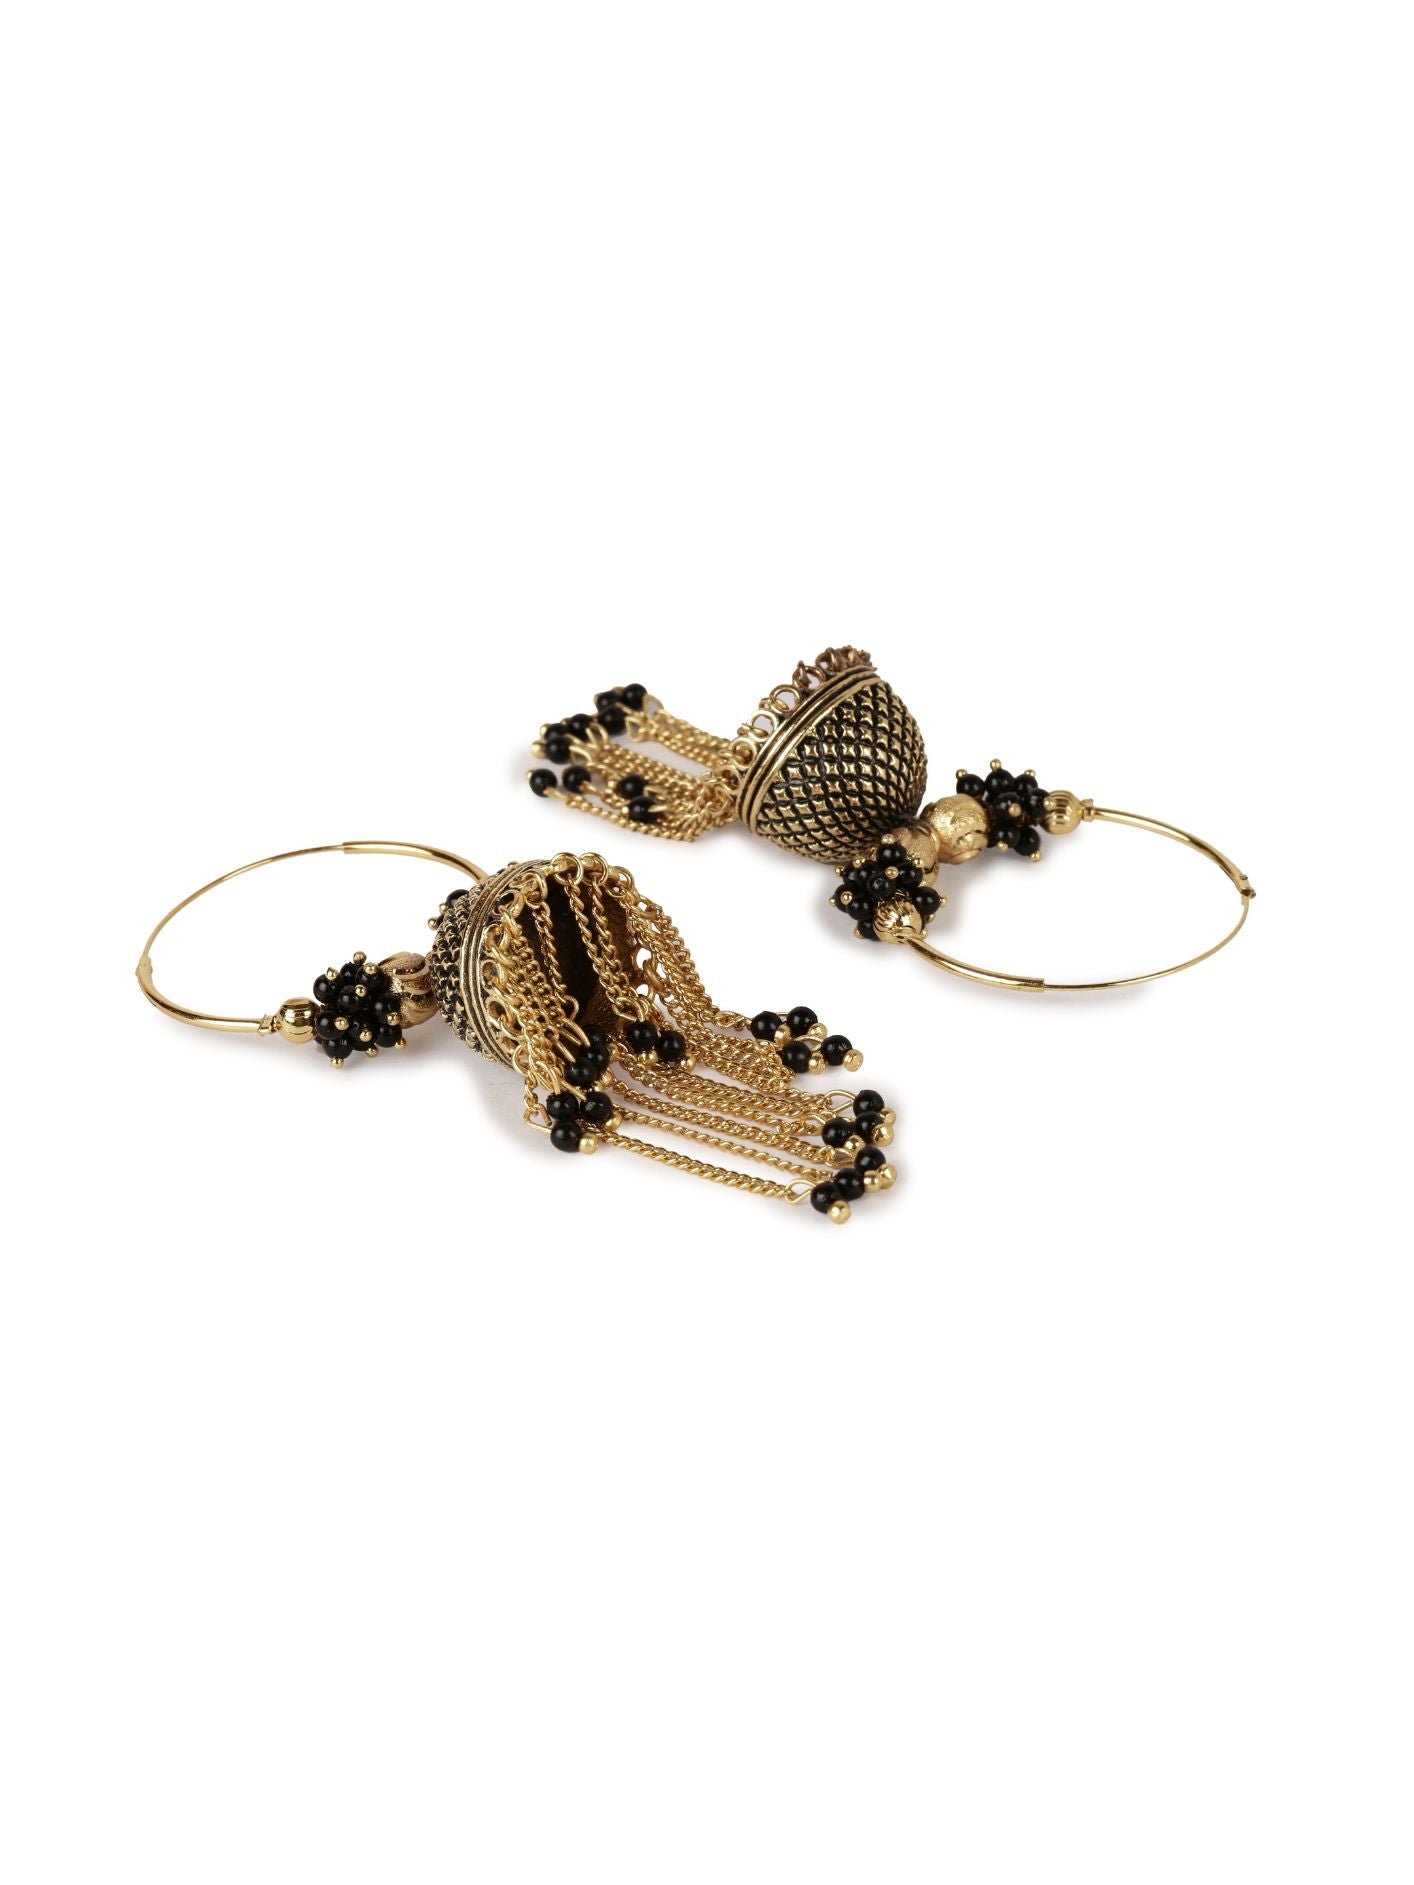 Women's Black & Gold-Plated Enamelled Dome Shaped Jhumkas - Anikas Creation